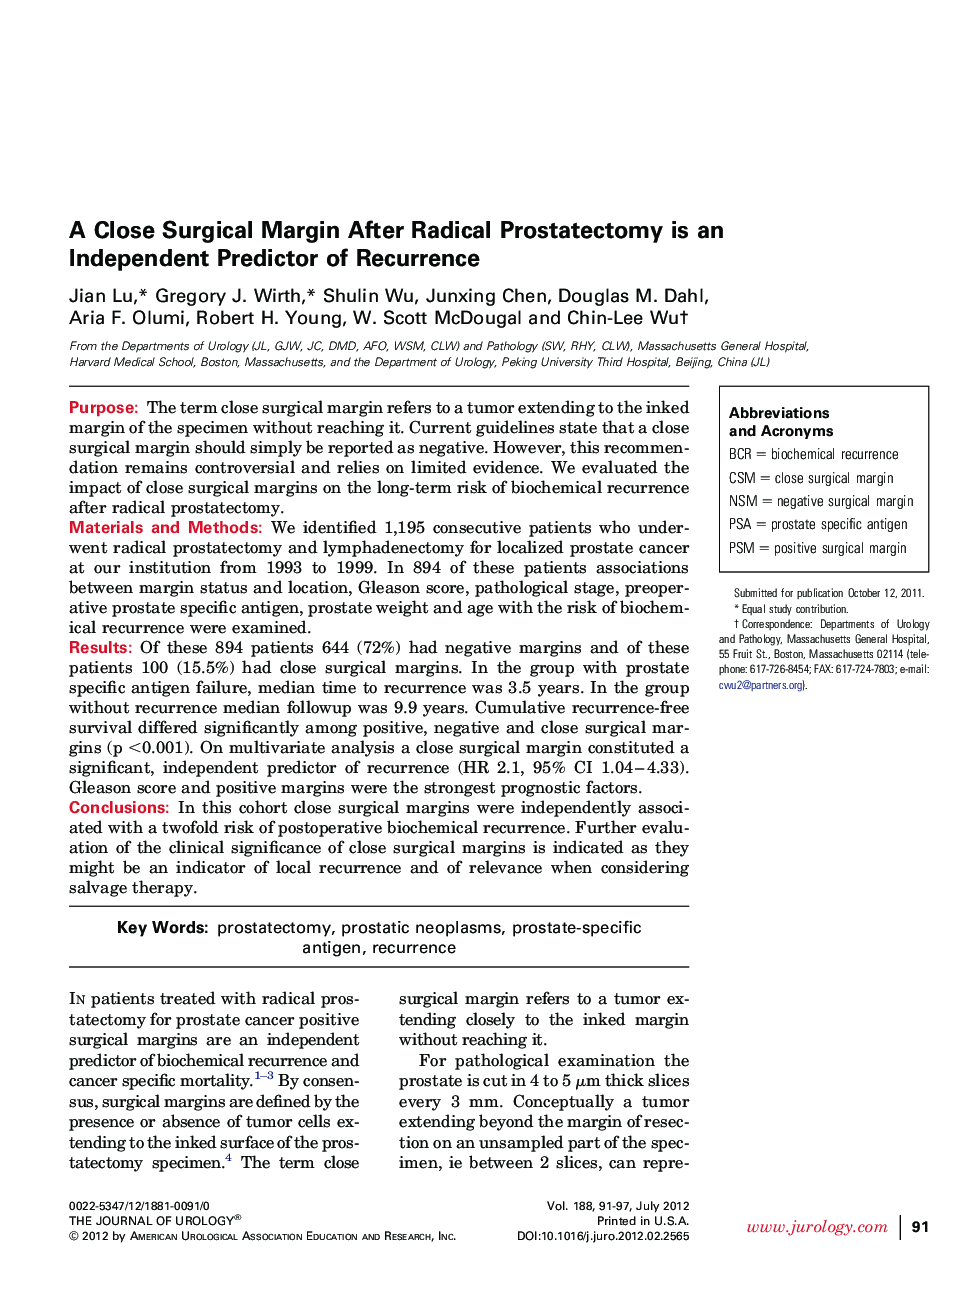 A Close Surgical Margin After Radical Prostatectomy is an Independent Predictor of Recurrence